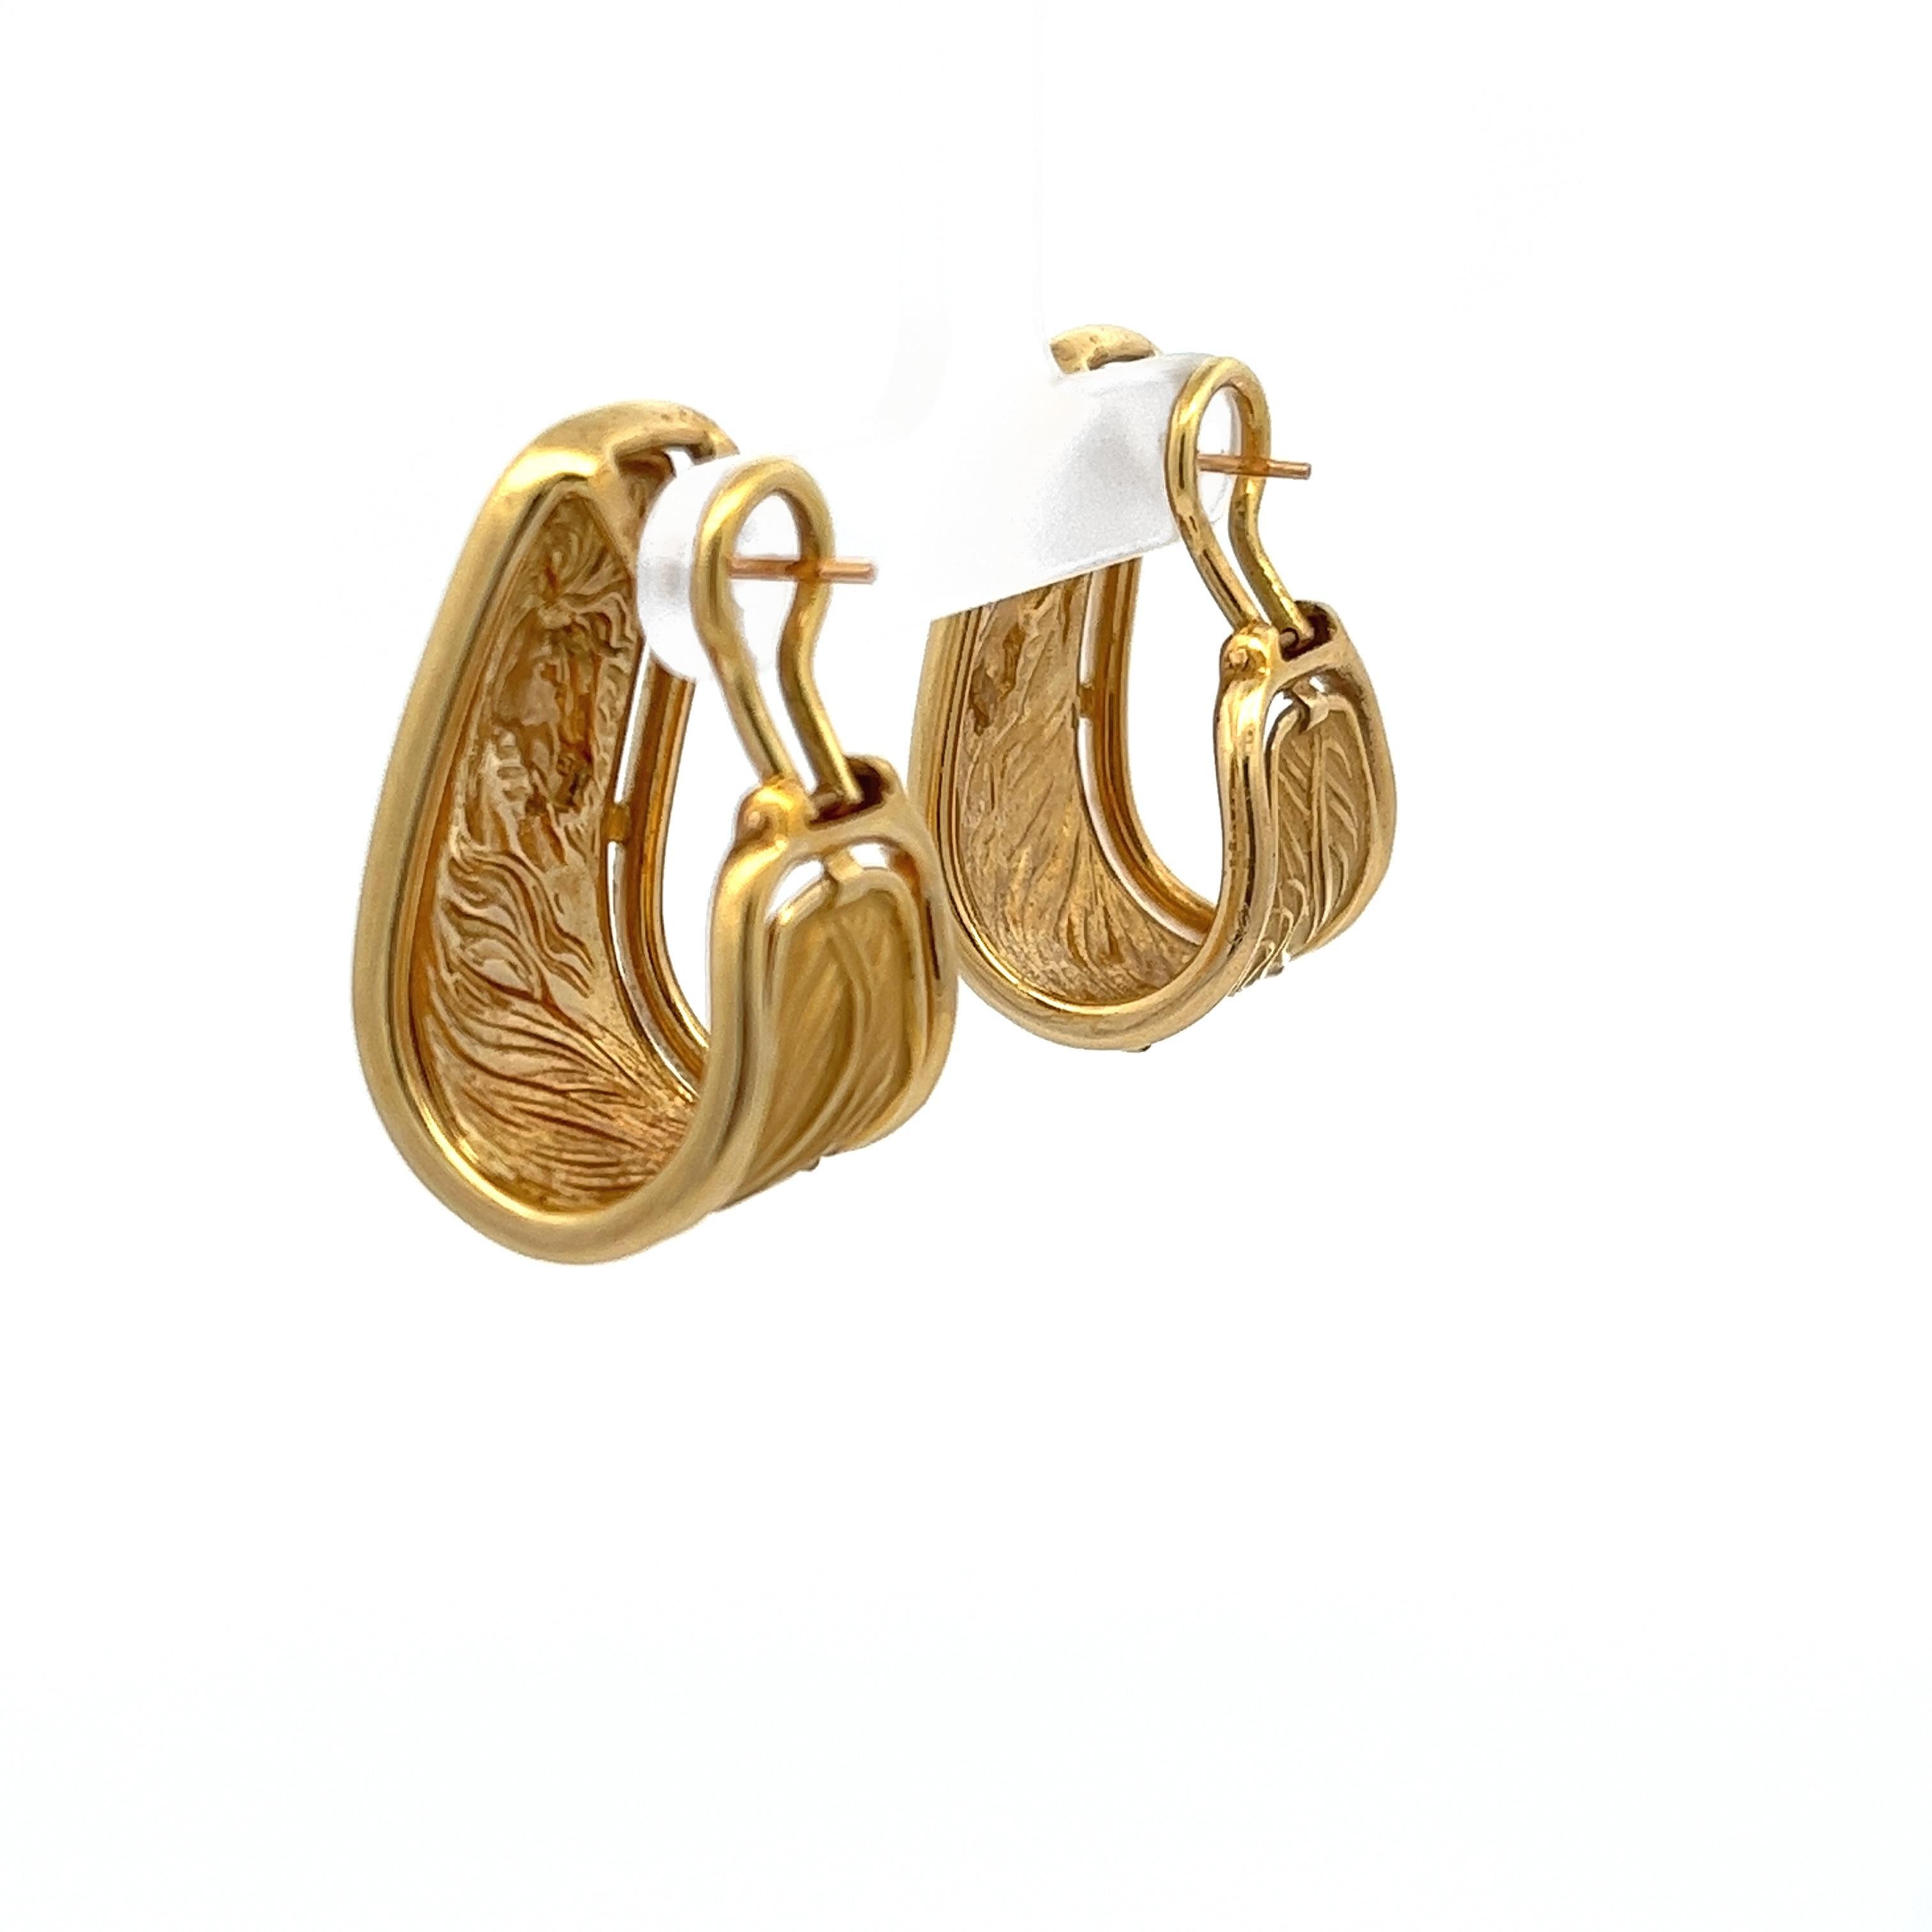 Carrera Y Carrera is an icon for craftsmanship and charismatic fine jewelry and these earrings show no exception. Drawing inspiration from the equestrian world, these earrings display a majestic long haired horse with a flowing mane. The intricate